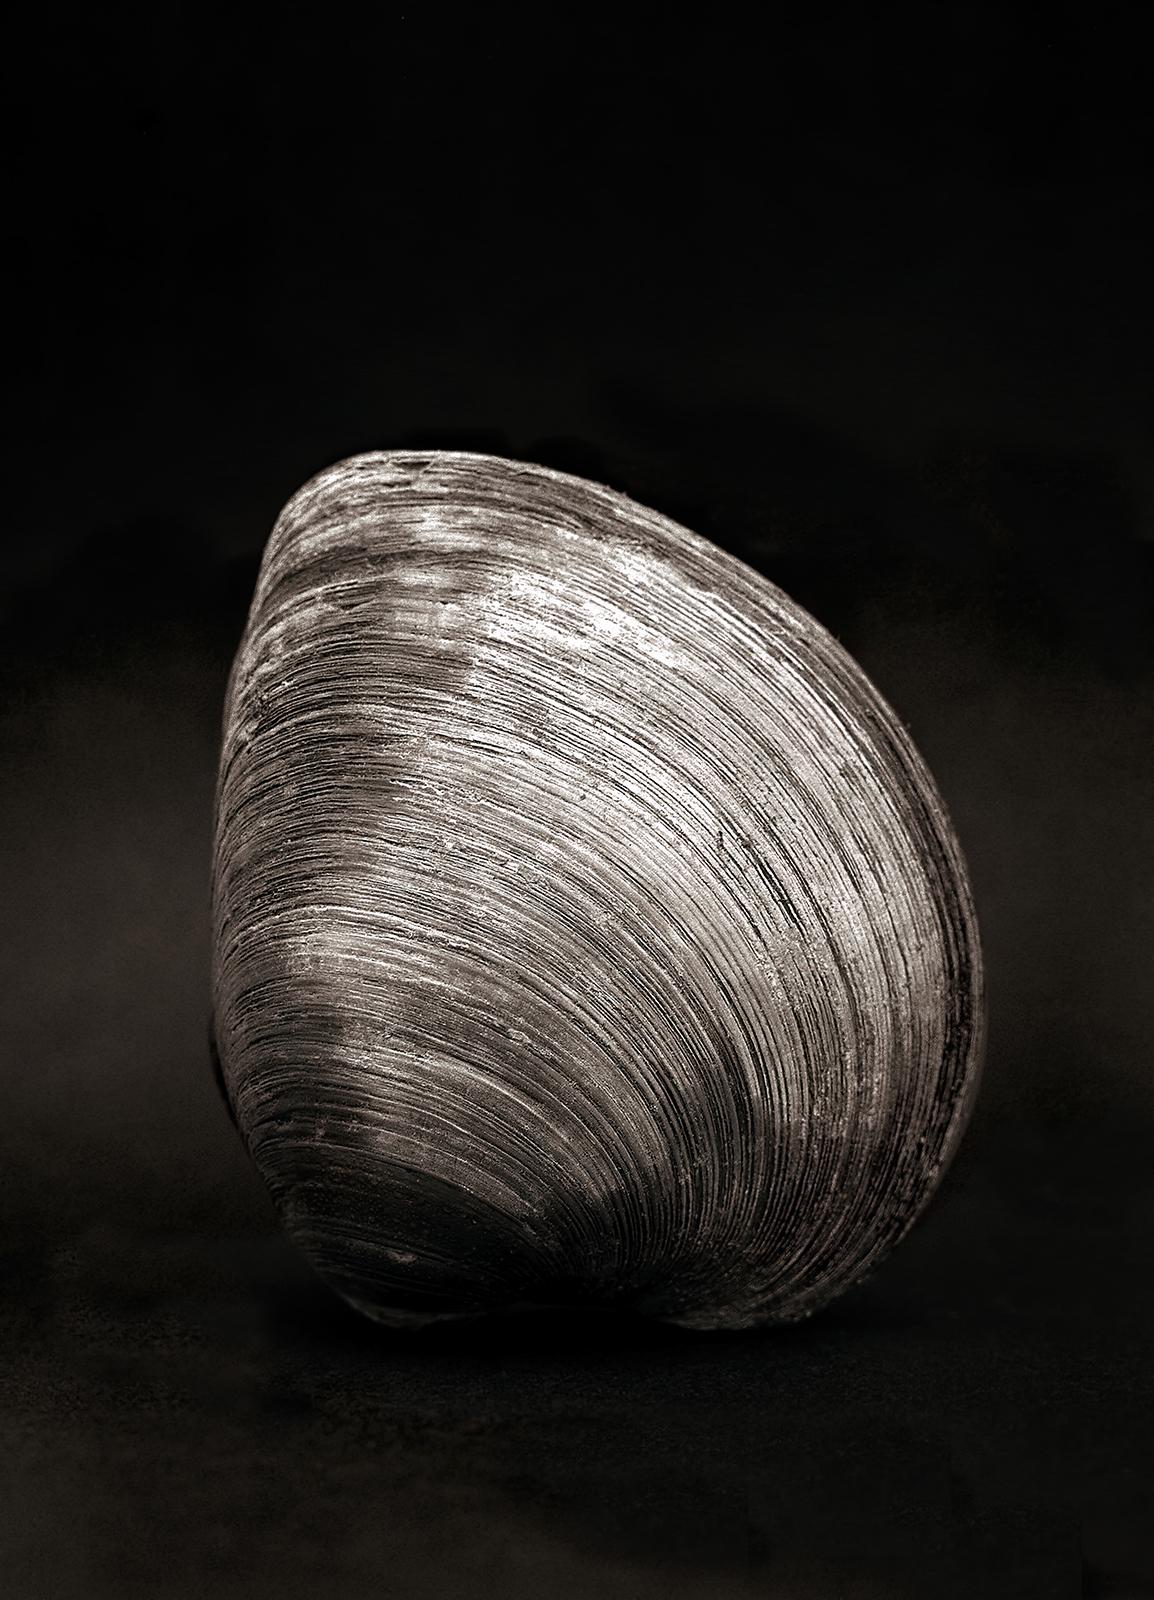 Clam - Signed limited edition animal fine art print, Black and white still life - Contemporary Photograph by Ian Sanderson